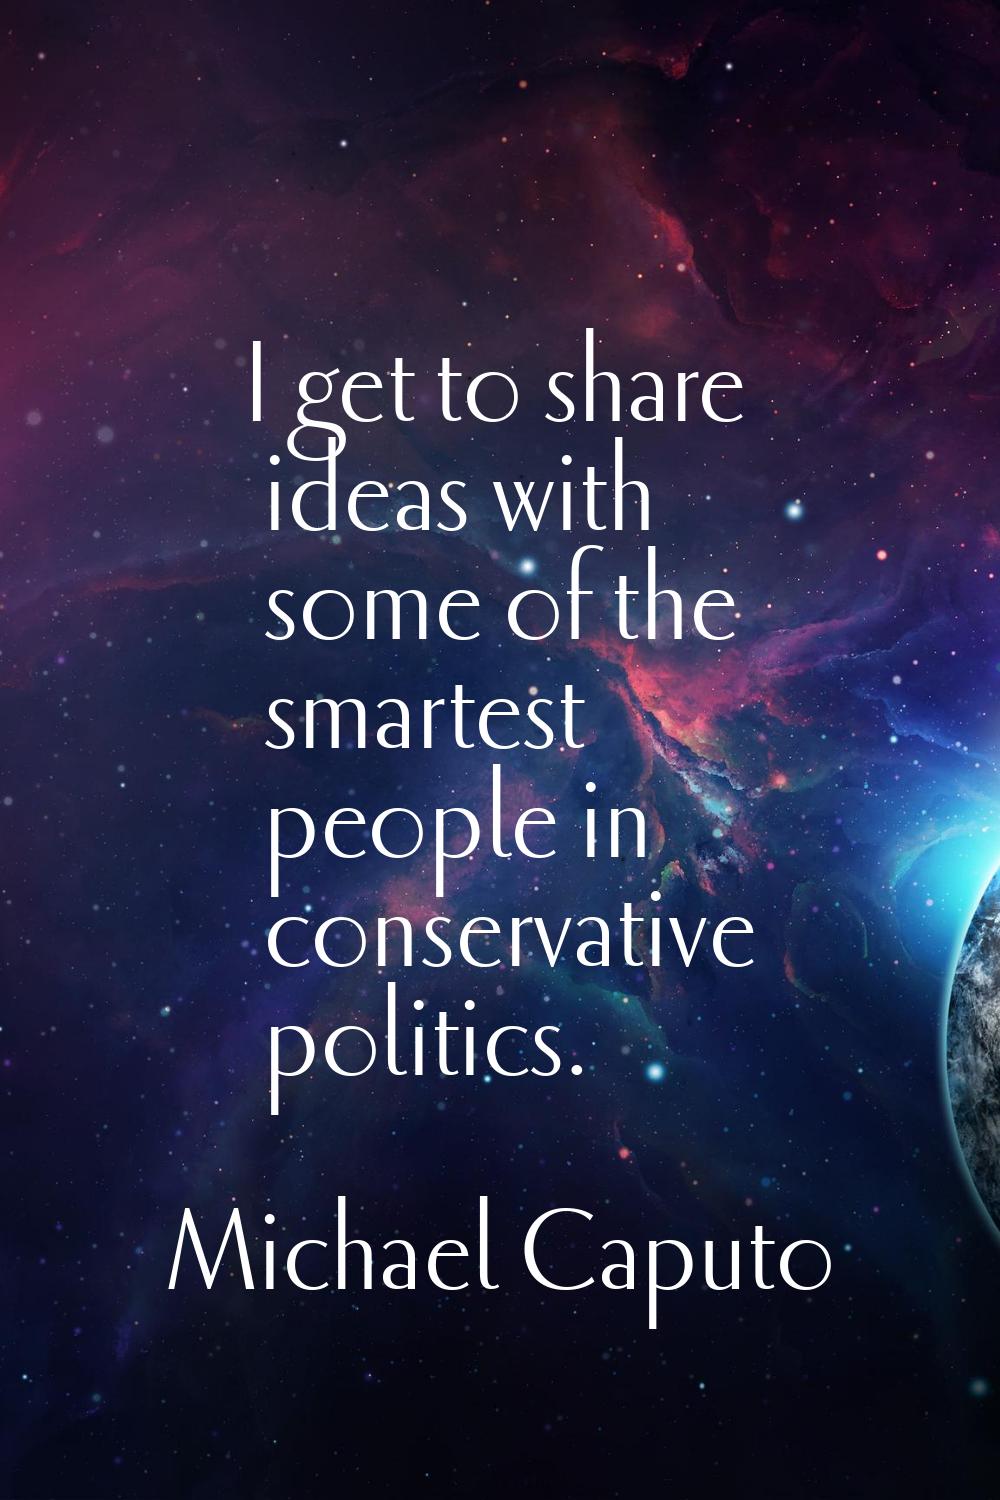 I get to share ideas with some of the smartest people in conservative politics.